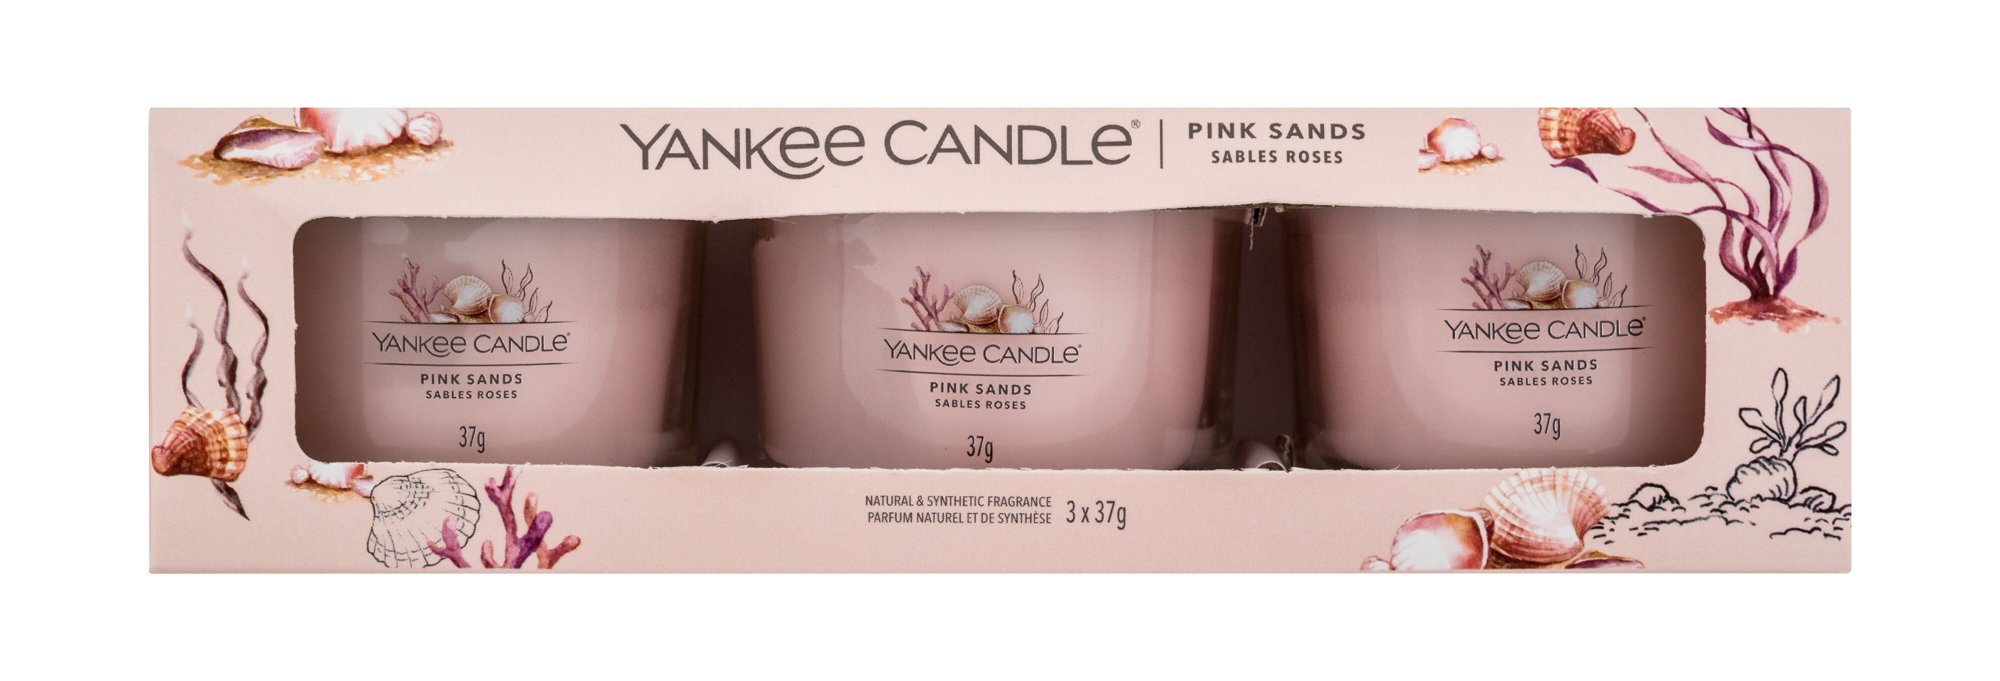 Yankee Candle Pink Sands 37g Scented Candle 3 x 37 g Kvepalai Unisex Scented Candle Rinkinys